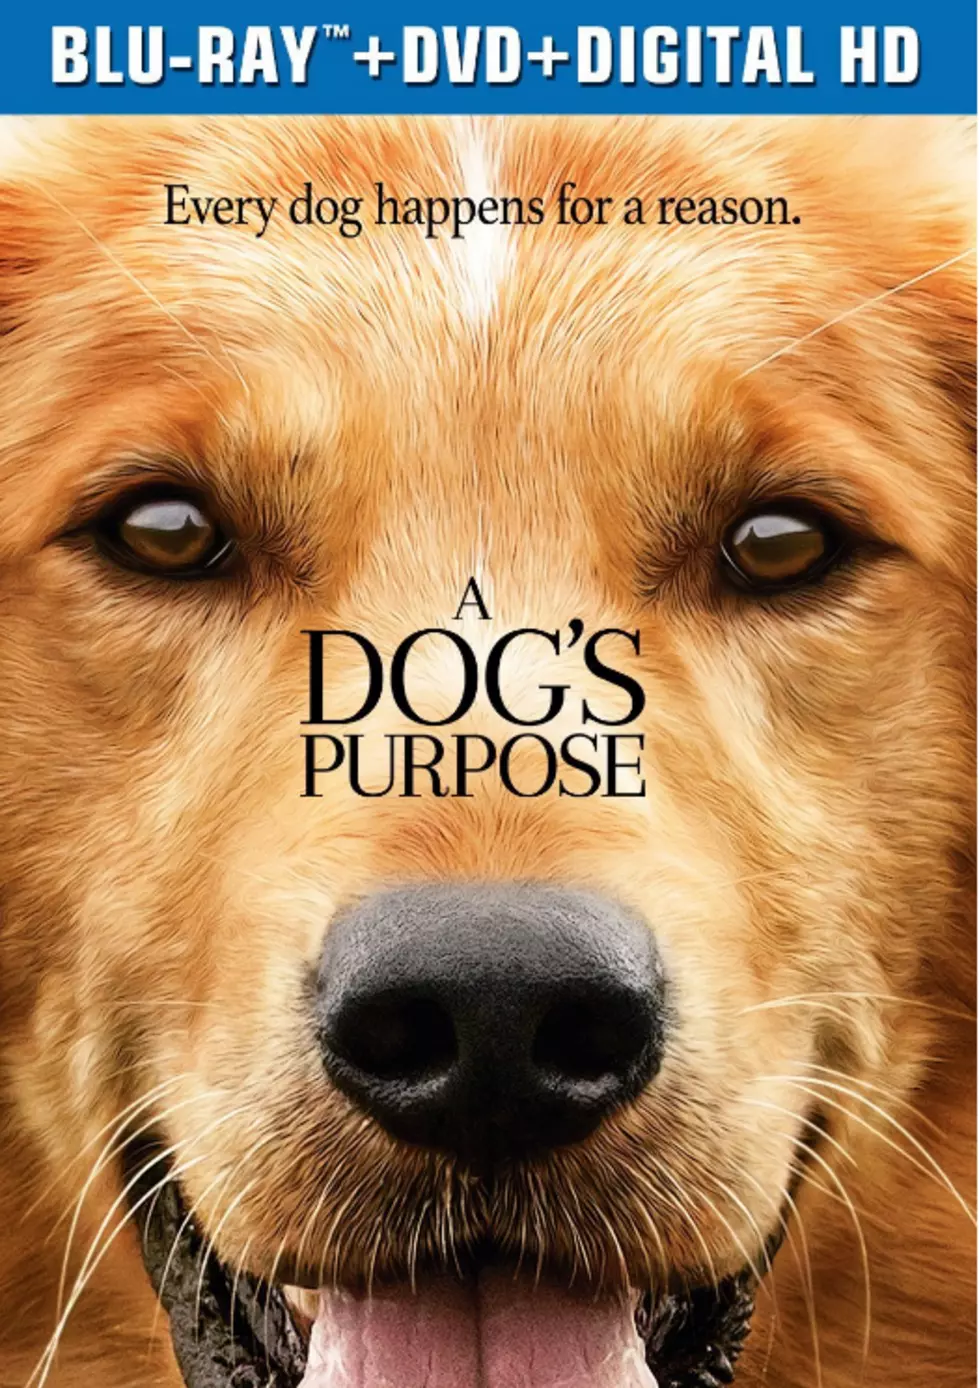 Mimi&#8217;s Review of the Movie &#8216;A Dog&#8217;s Purpose&#8217; &#8212; No Spoilers Here [OPINION]